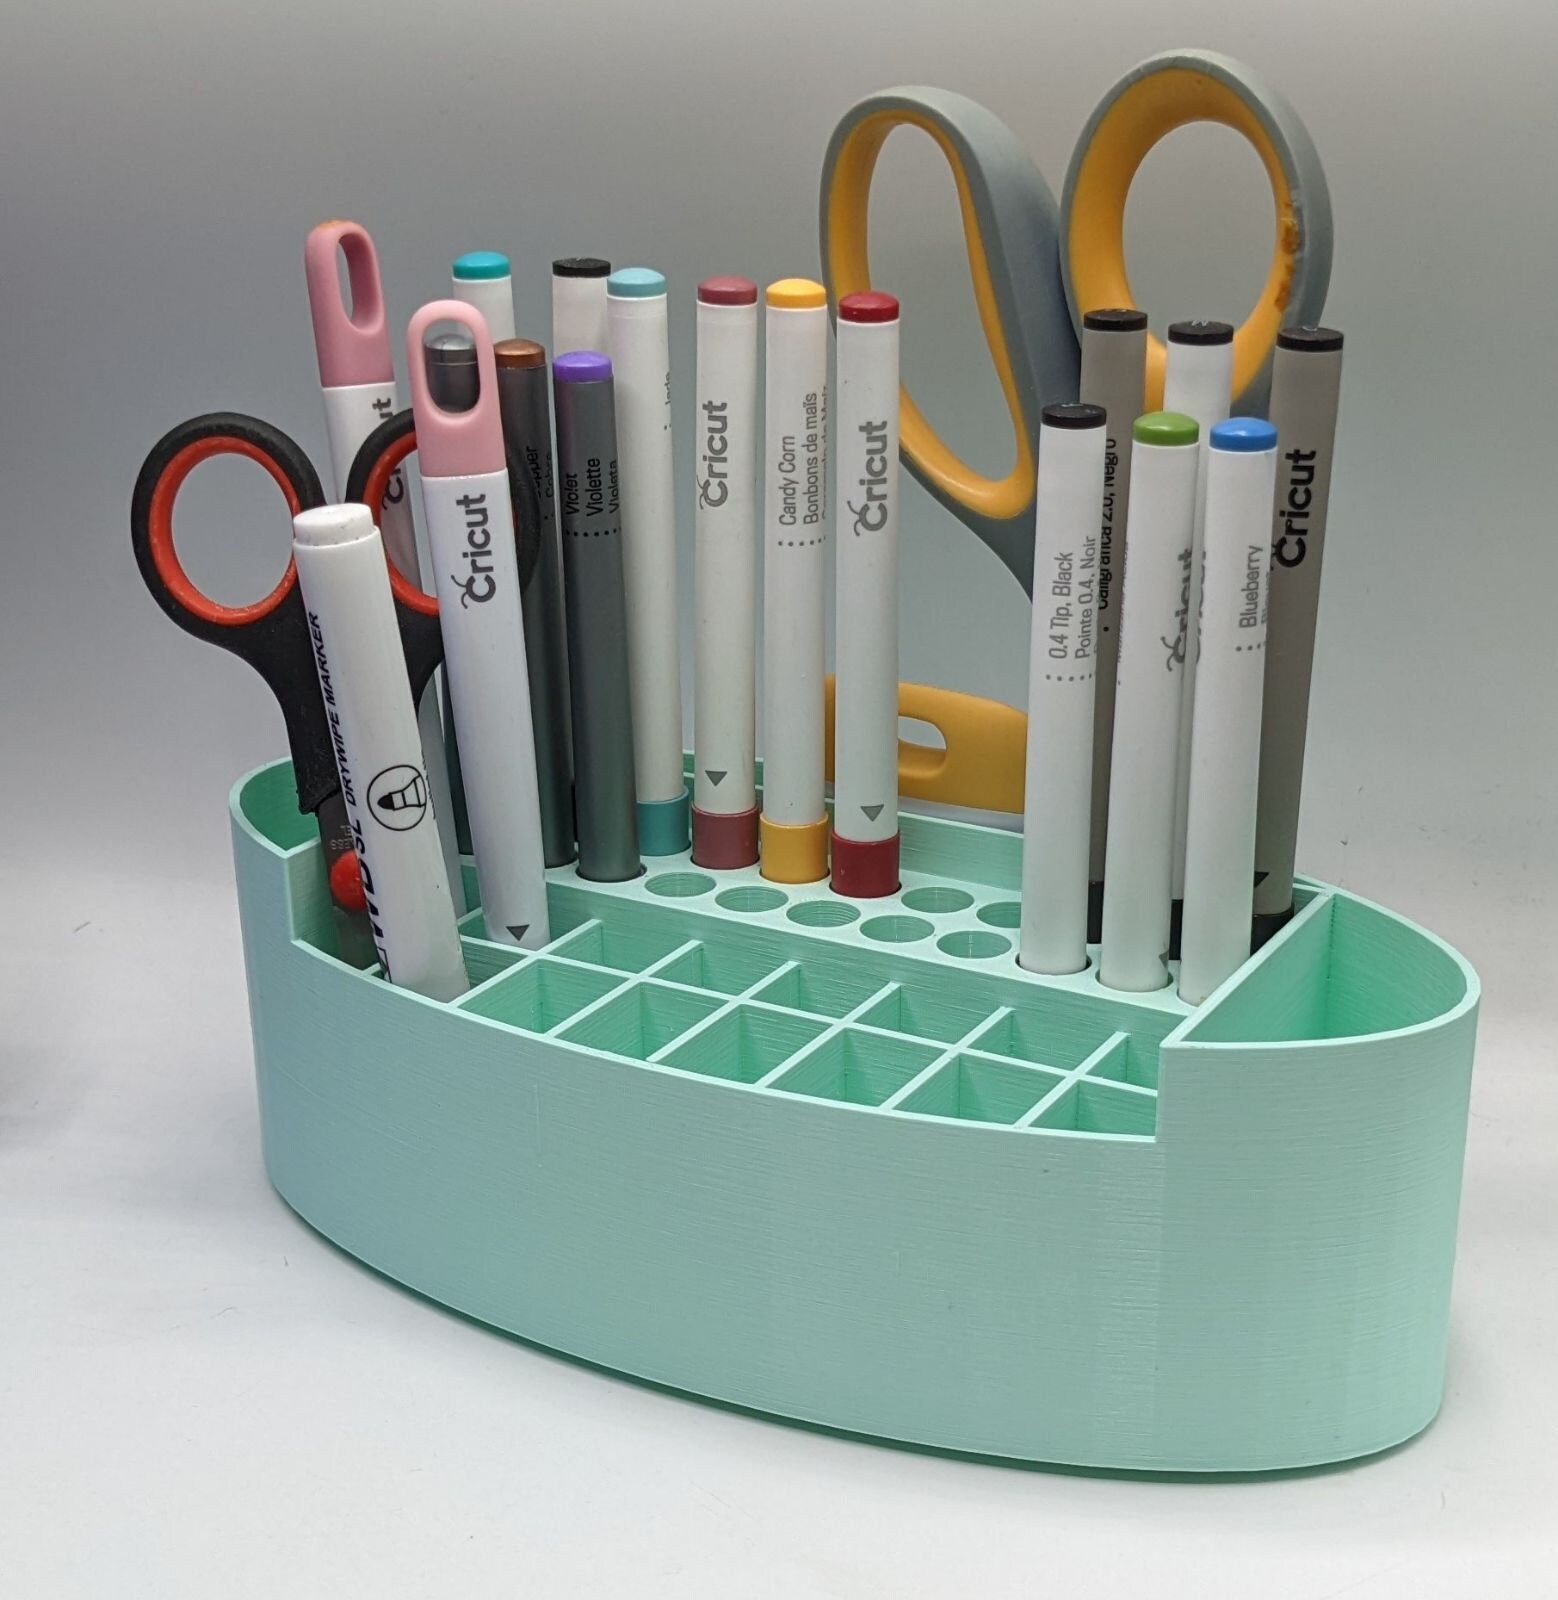 Tool Holder for Cricut Tool and Blades Designed by Jennifer -  Hong Kong